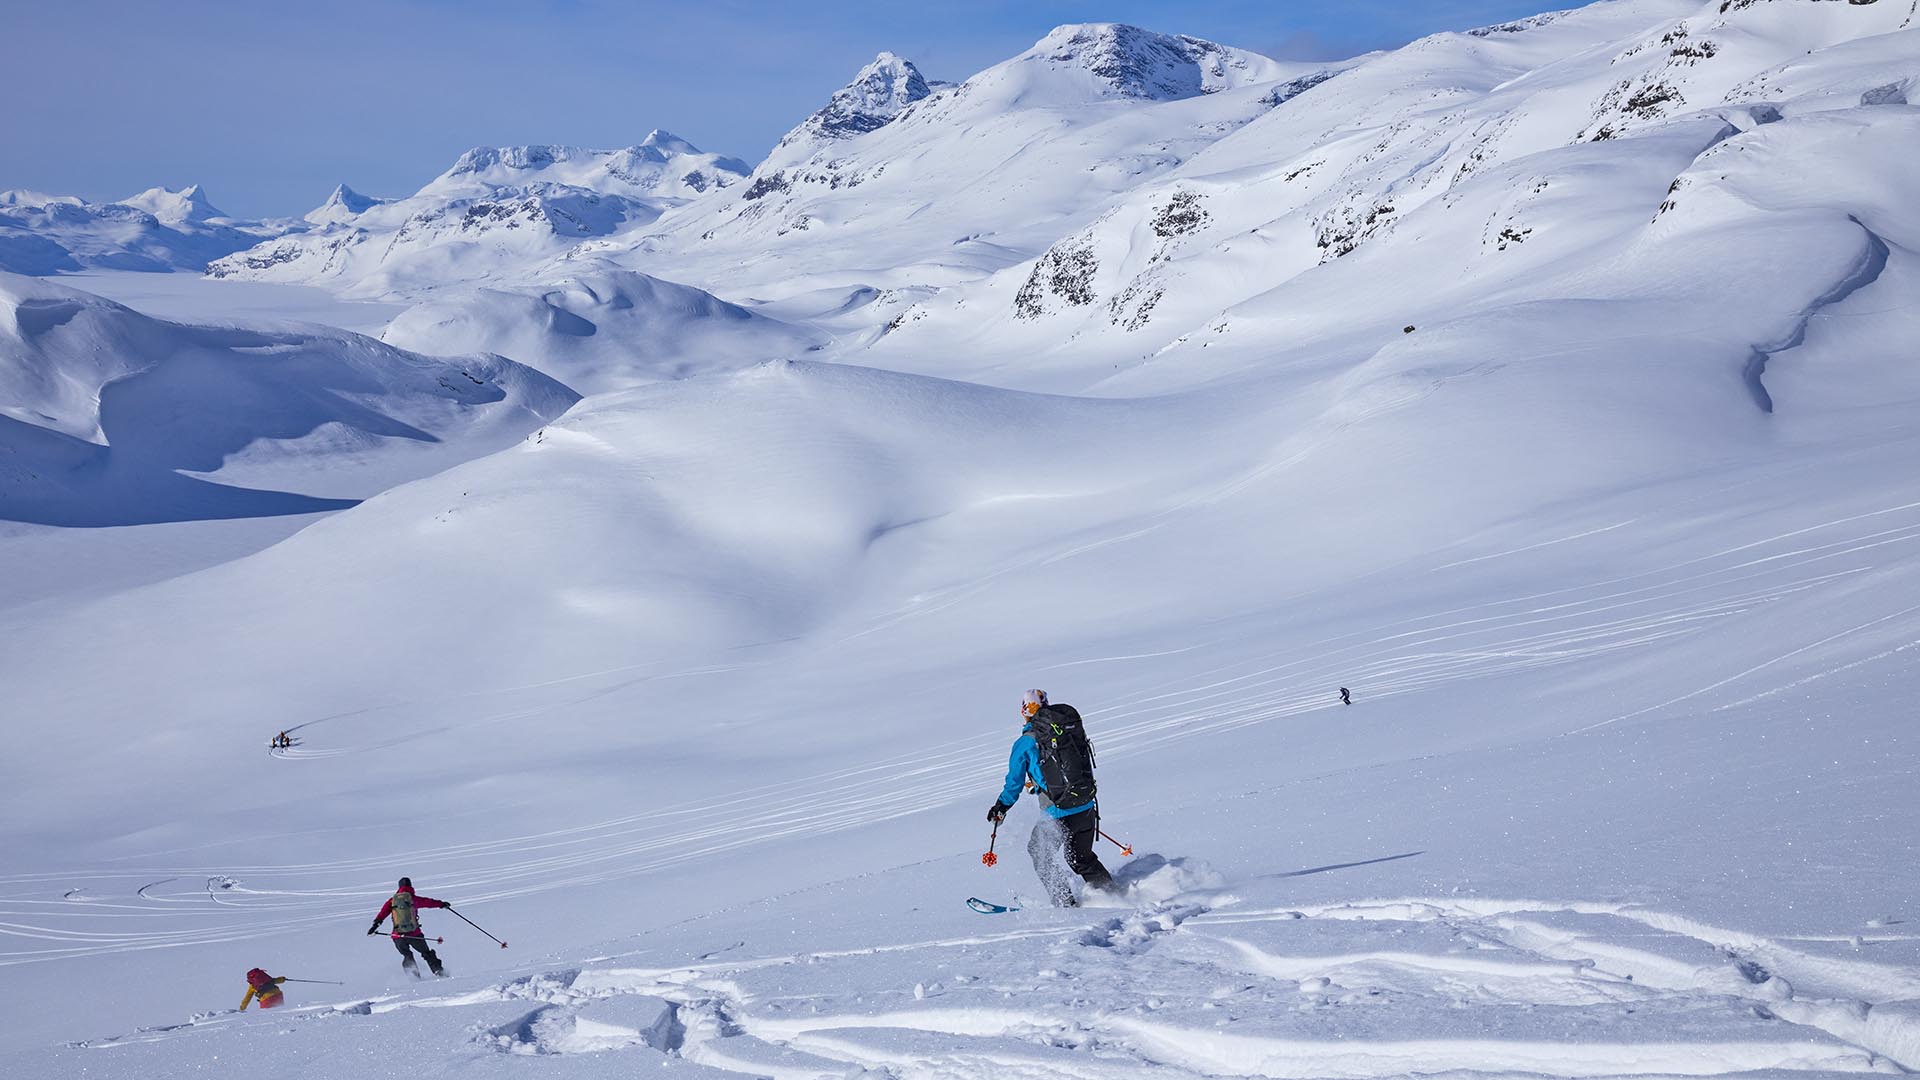 3 persons on their way down a mountain on randonee skis. Wild mountains in the background.